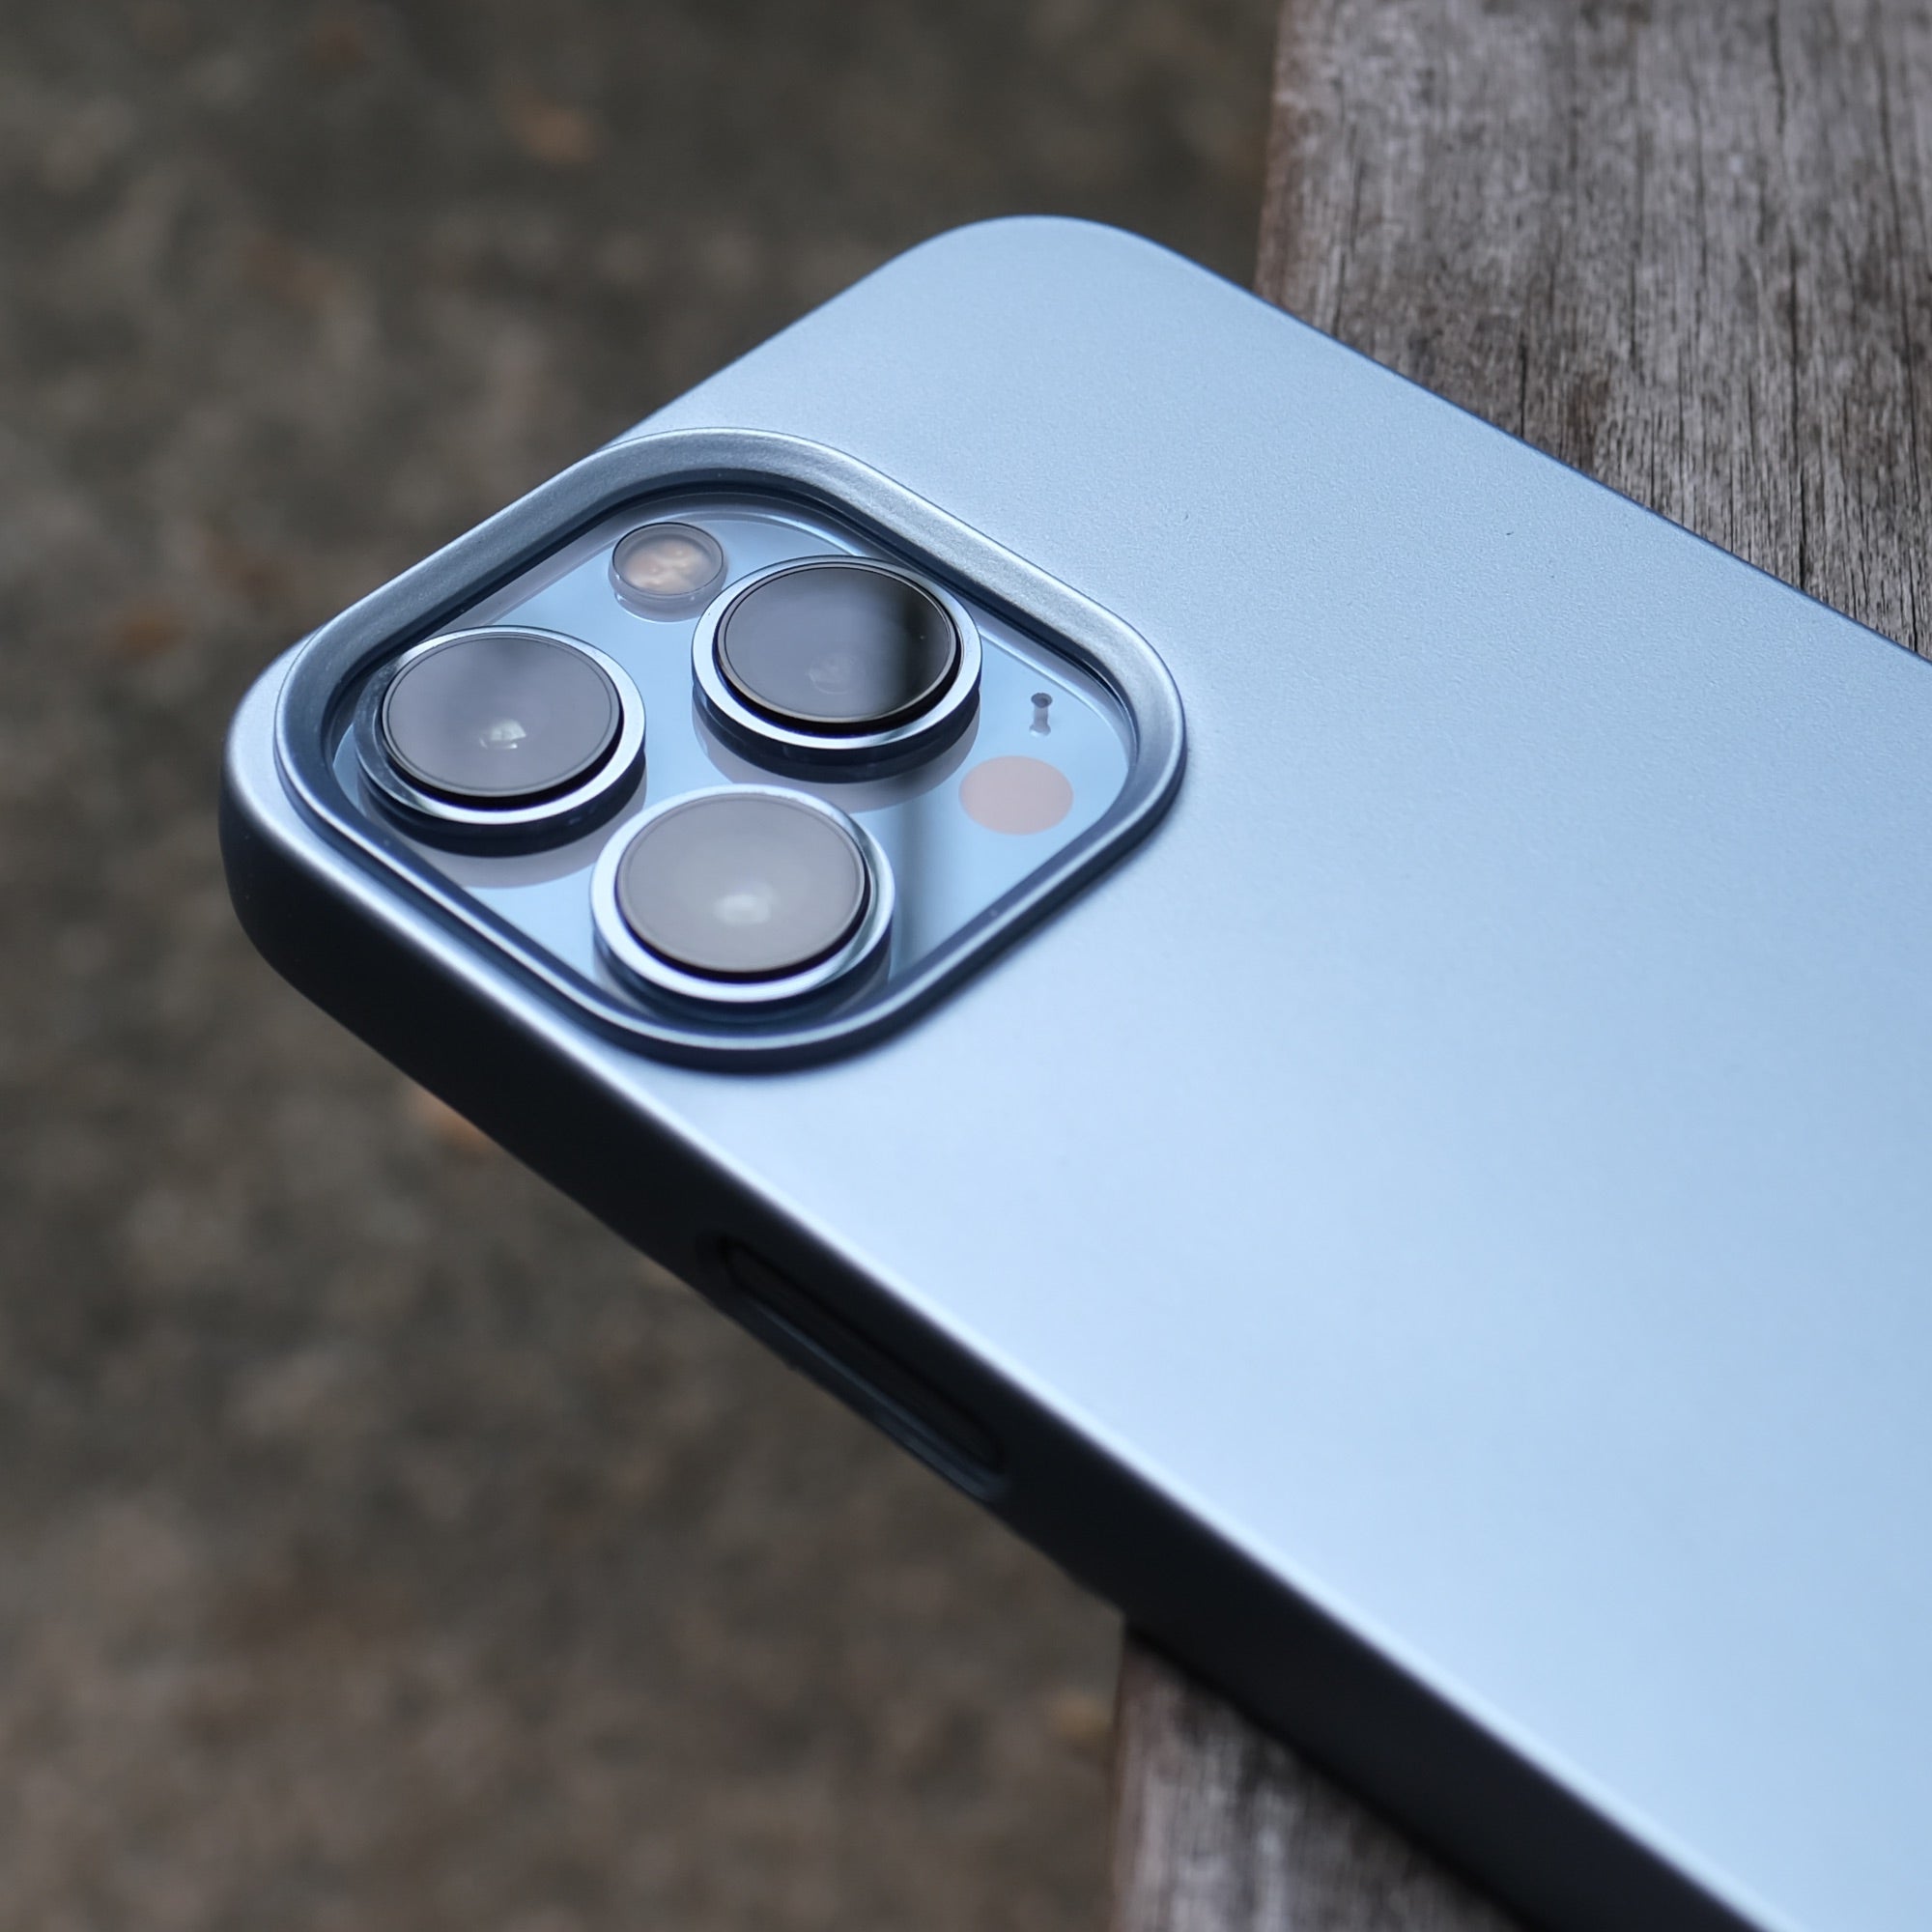 The Best iPhone 13 Cases for iPhone 13, Pro & Pro Max